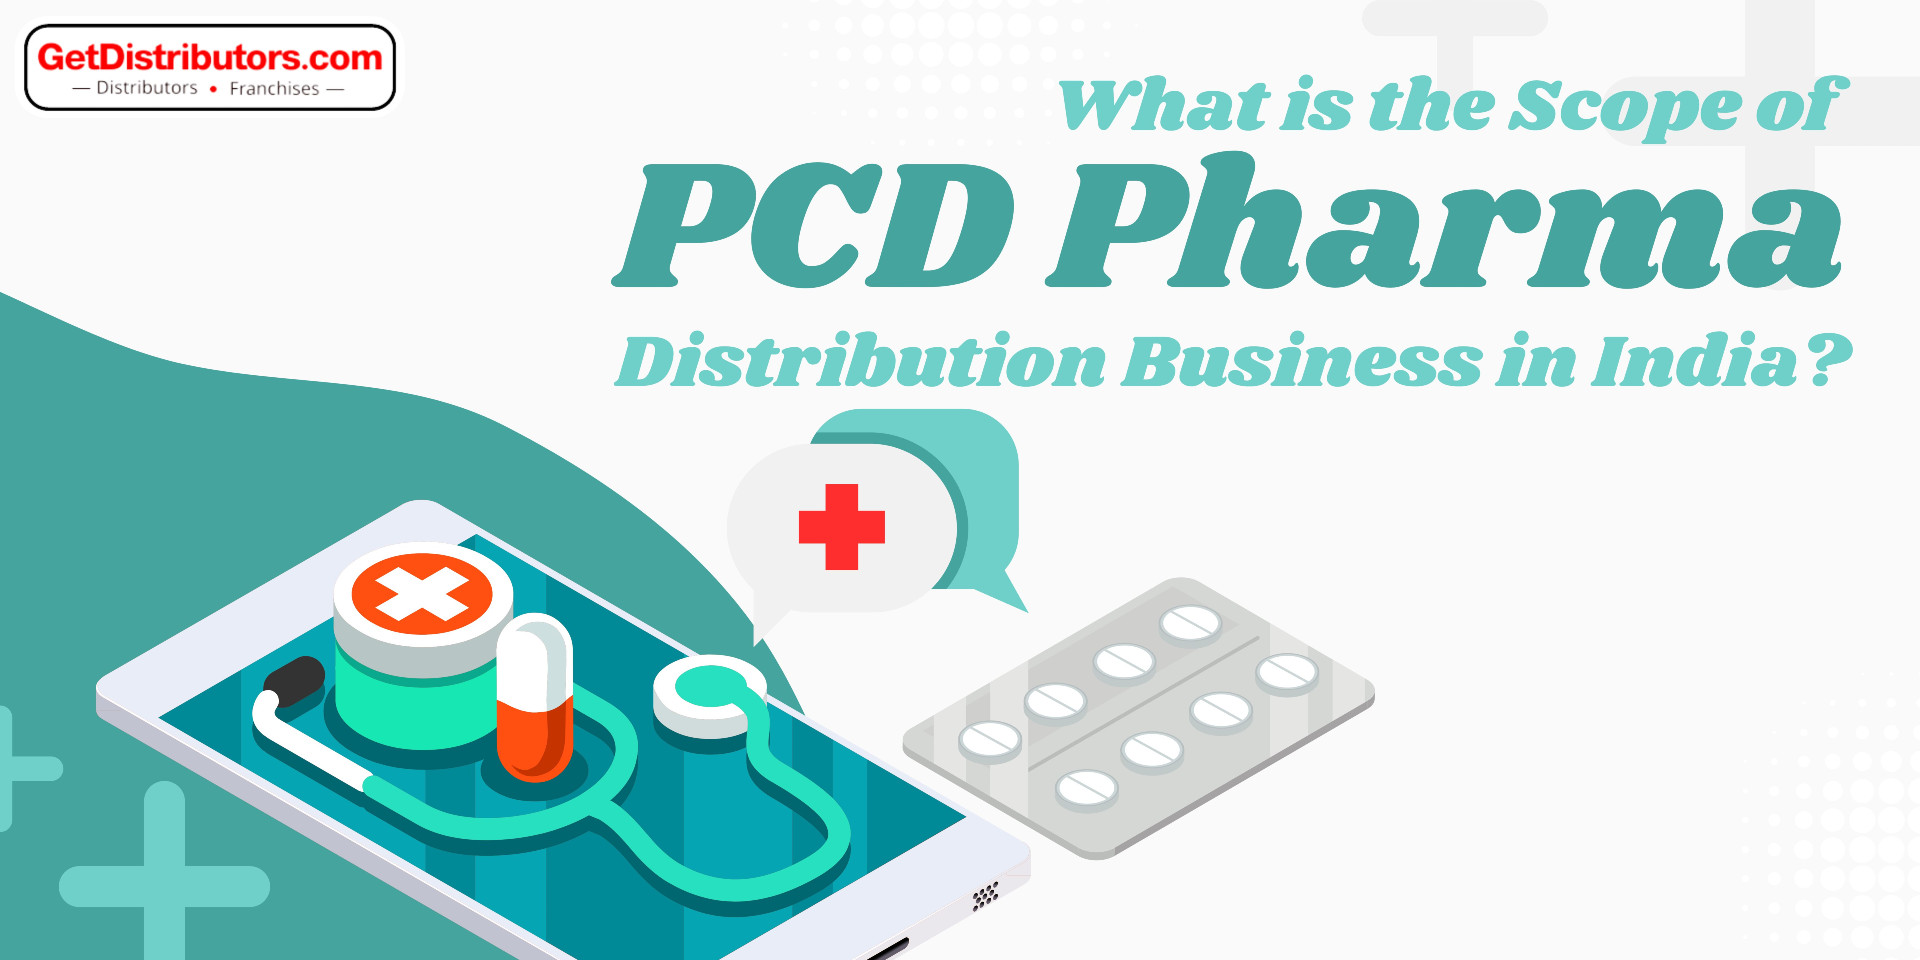 What is the Scope of PCD Pharma Distribution Business in India